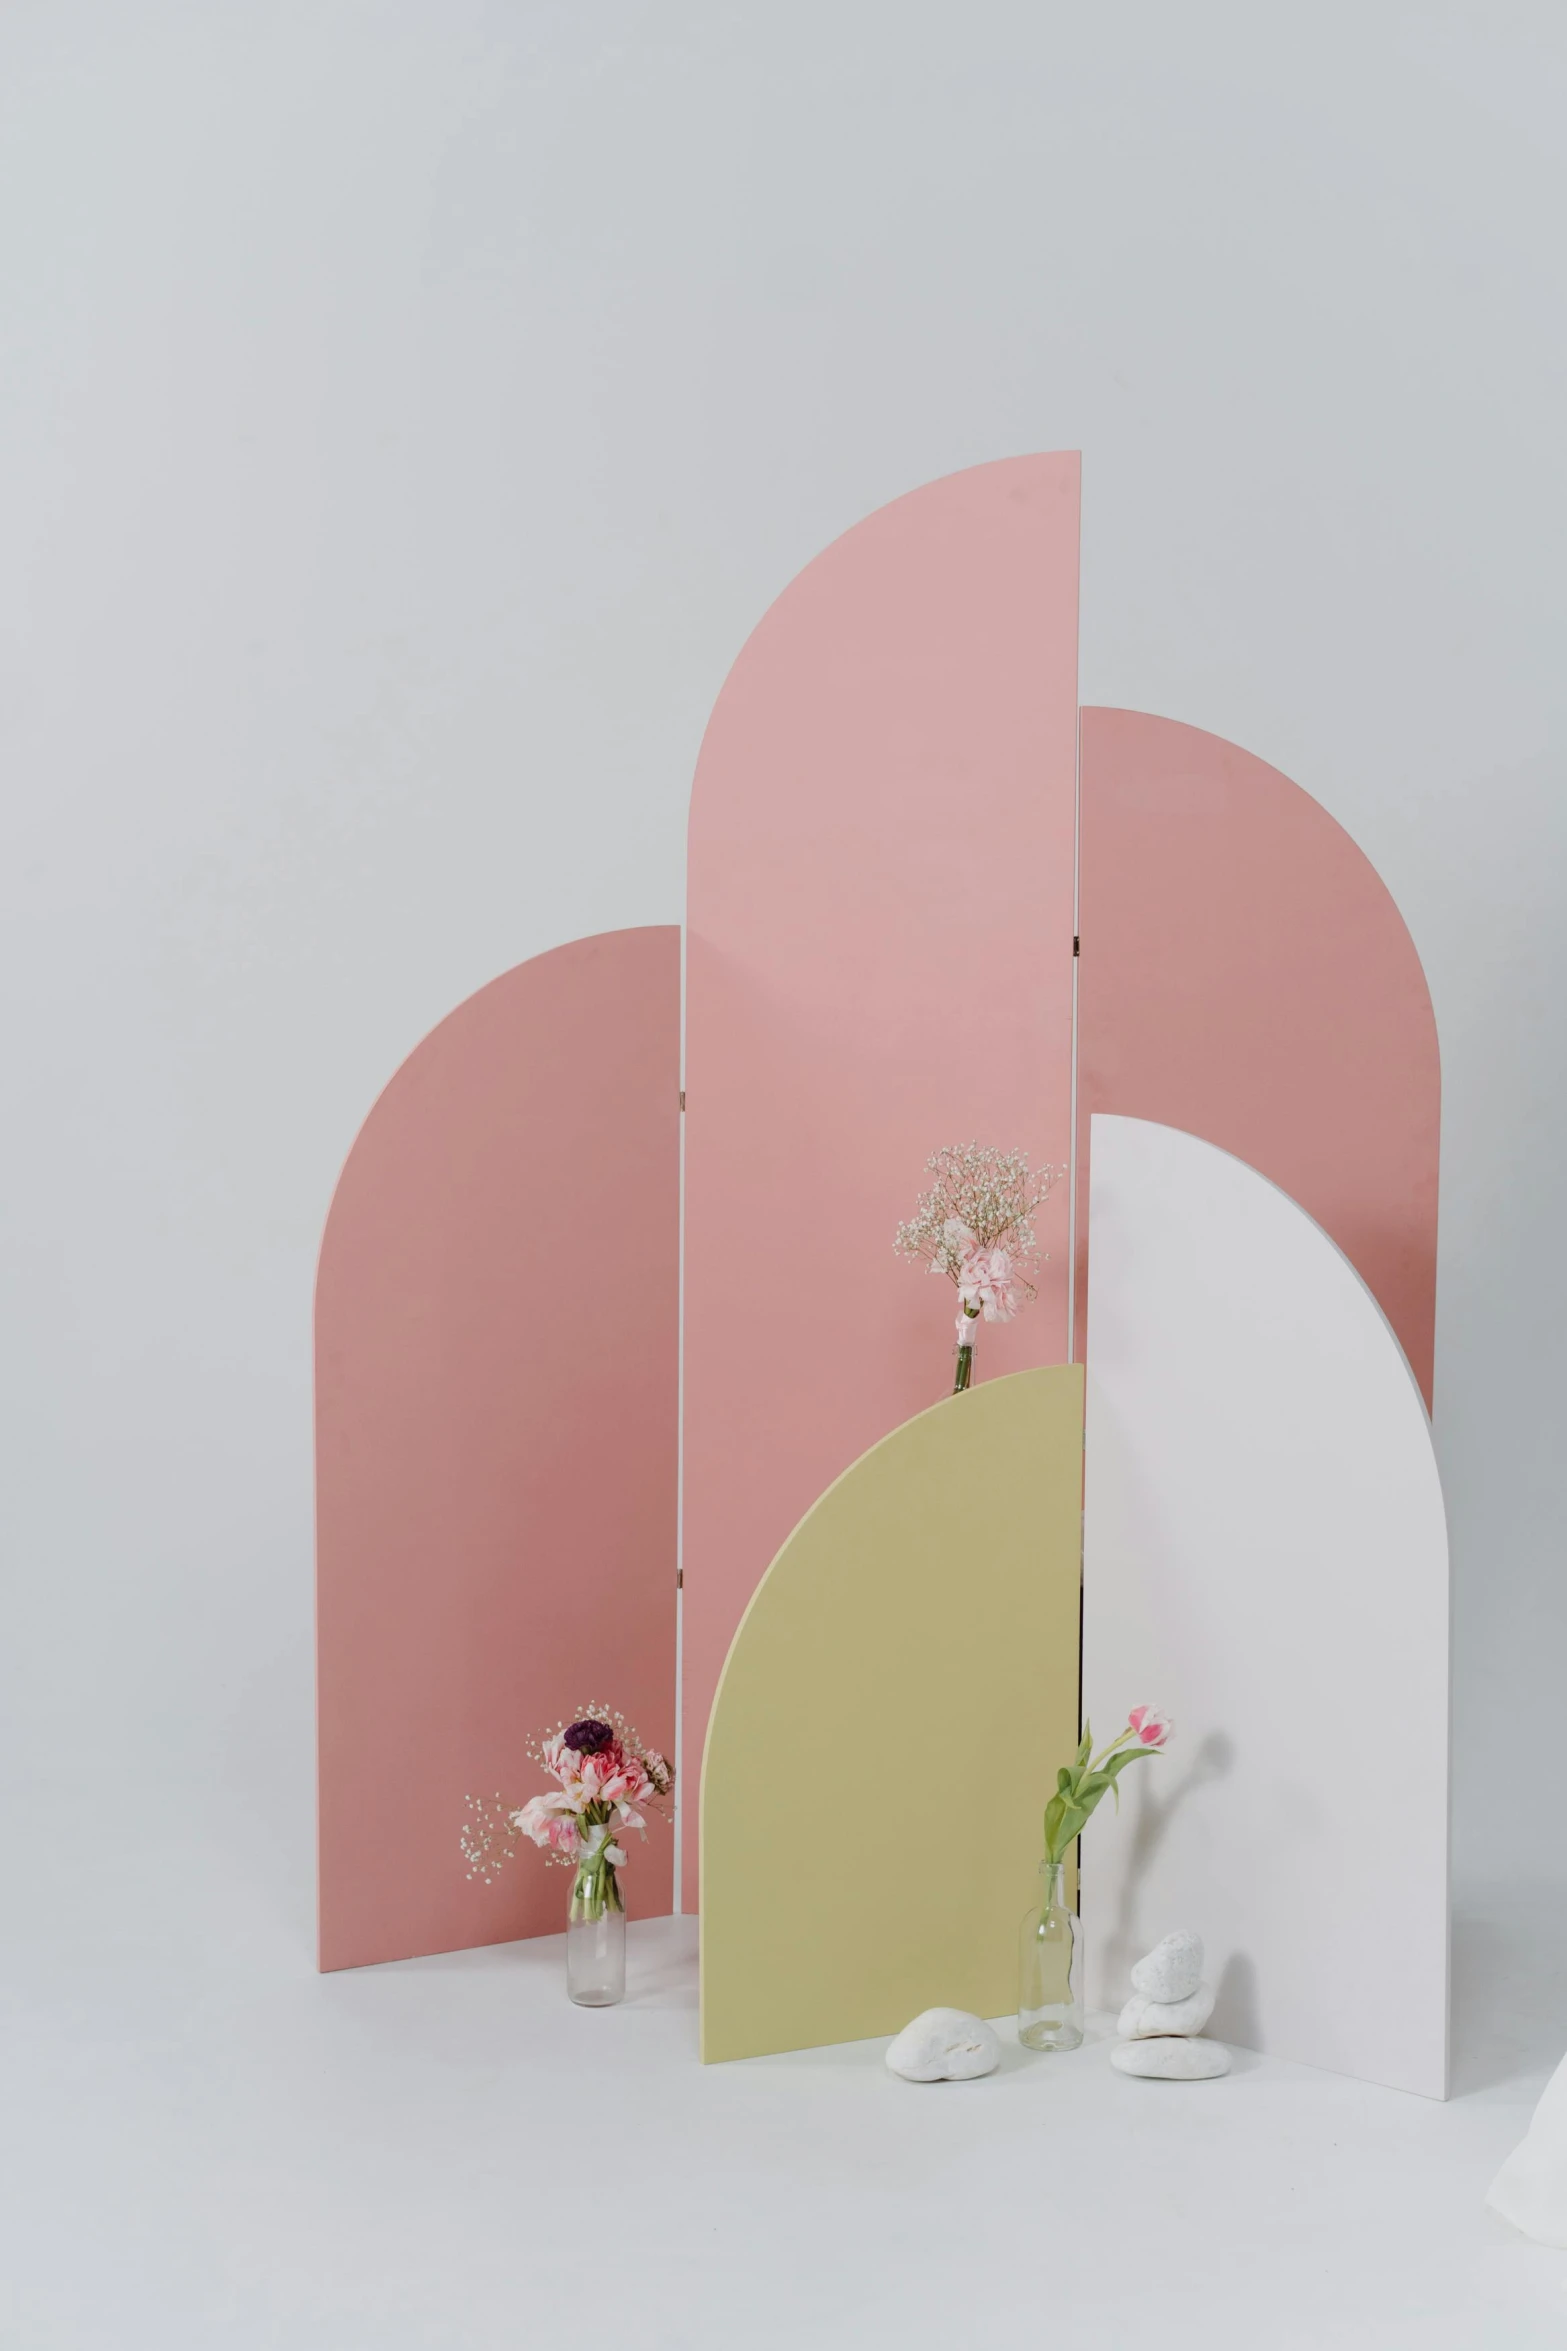 a couple of white vases sitting on top of a table, pink arches, translucent pastel panels, model photograph, laser cut